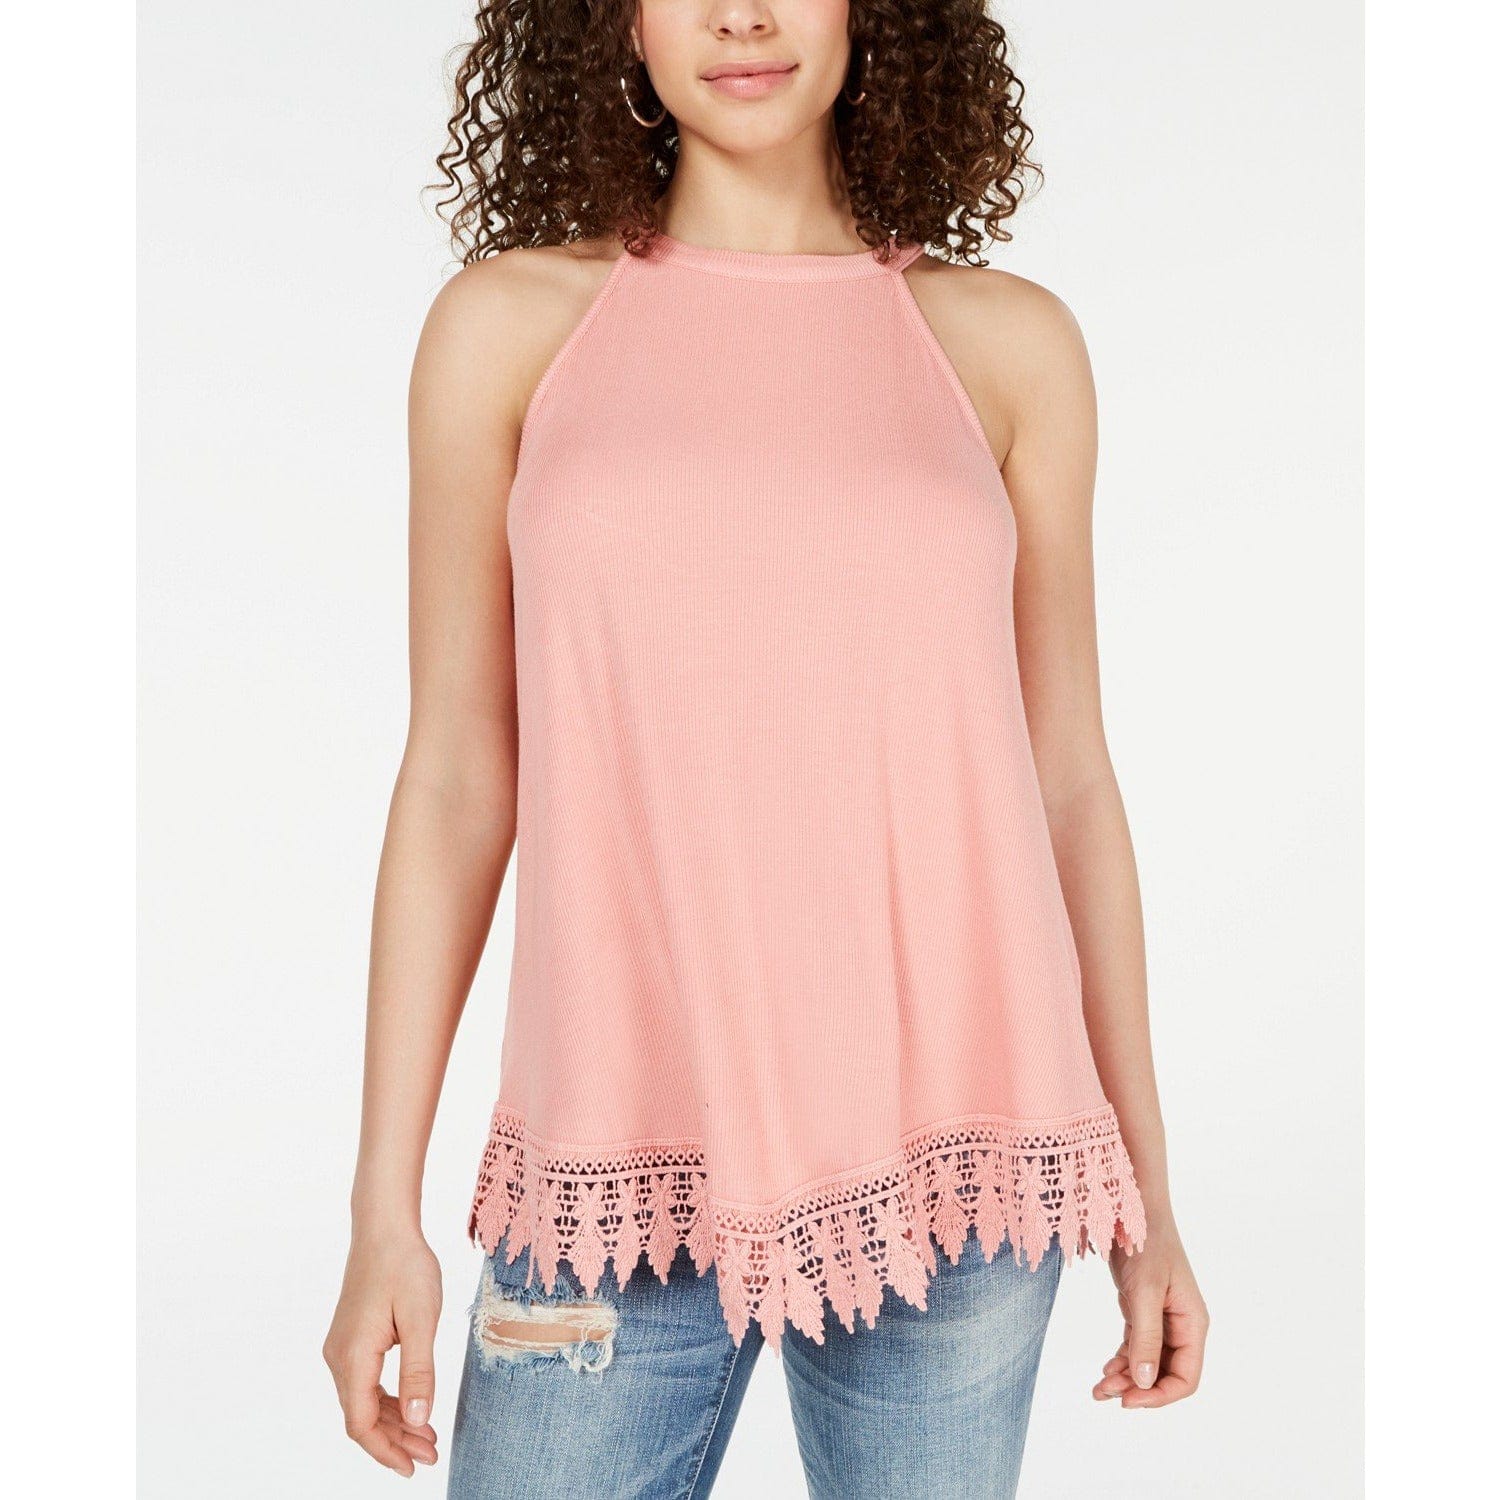 Hippie Rose Juniors' Rib-Knit Crochet Tunic Tank Top - The Pink Pigs, A Compassionate Boutique